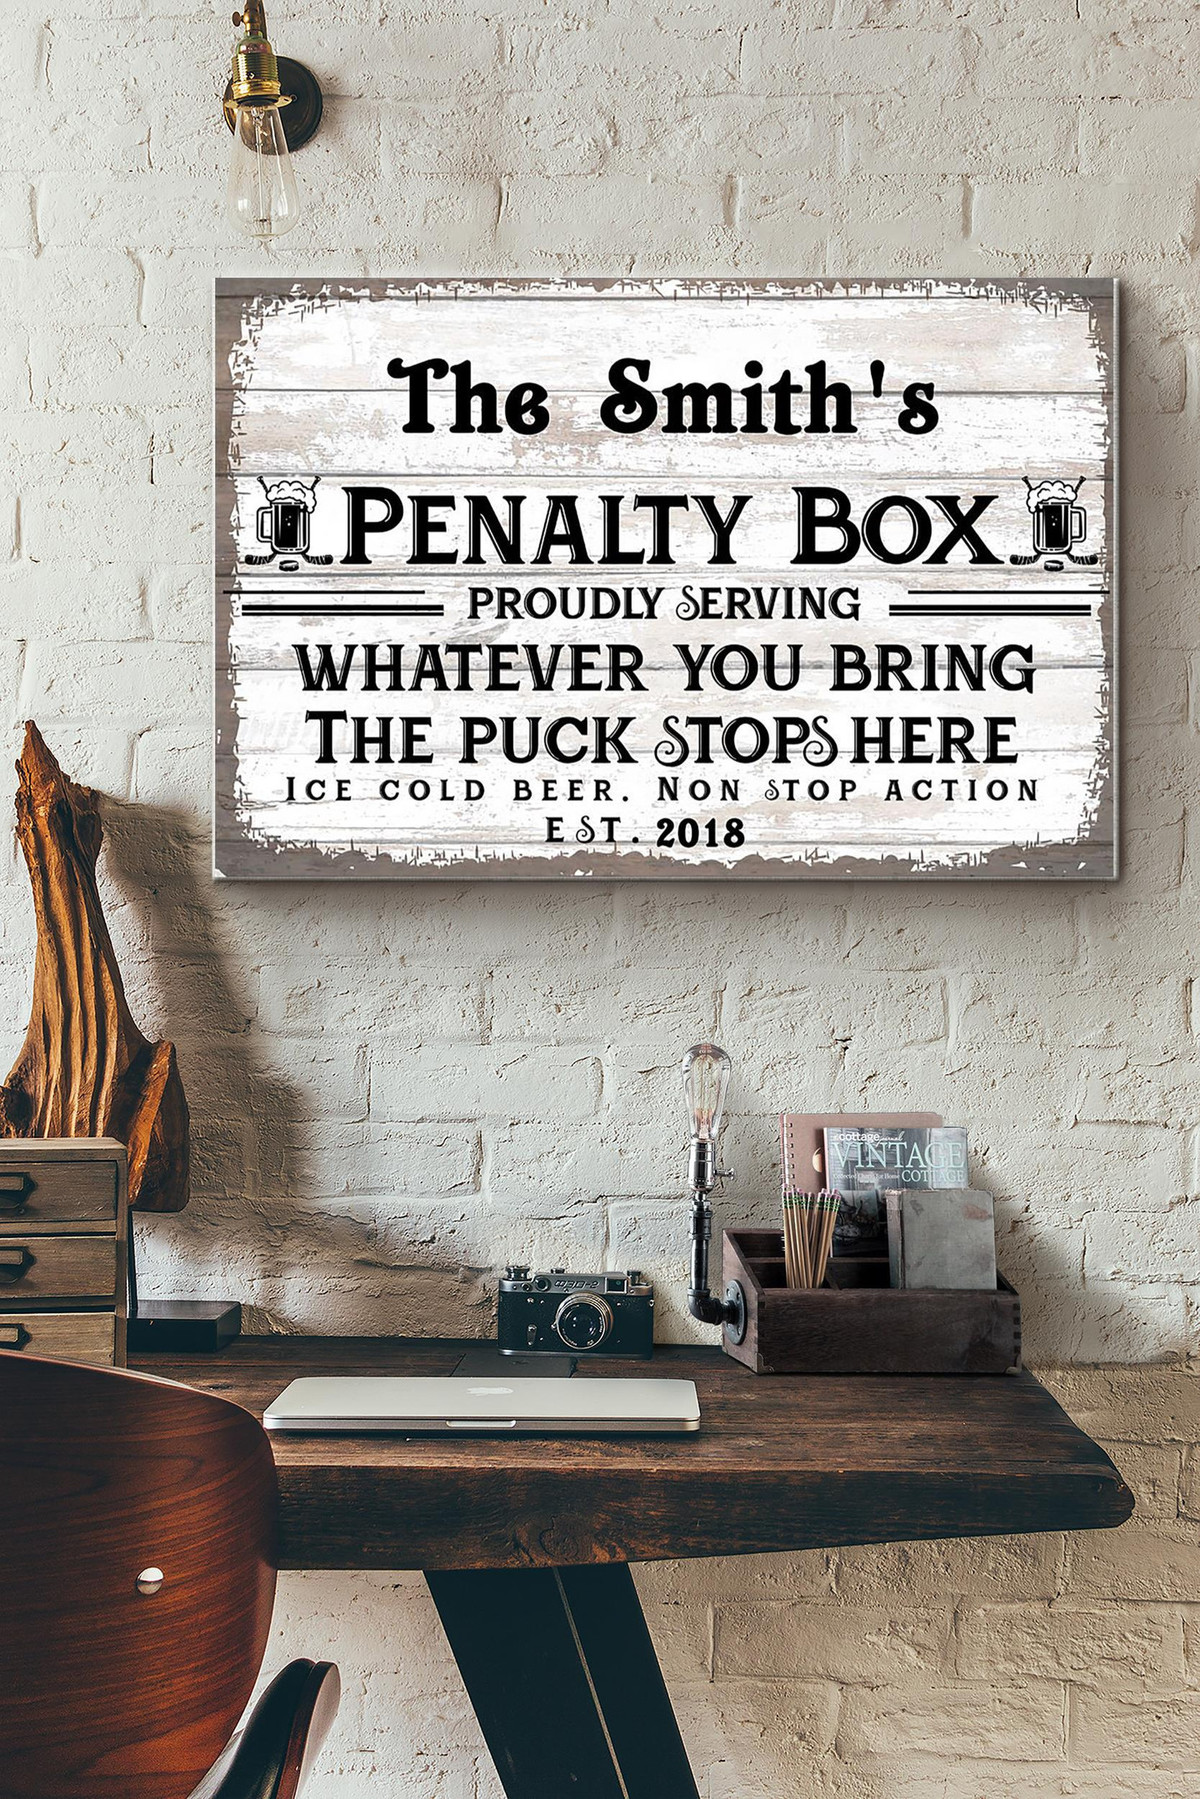 Ice Hockey Penalty Box Proudly Serving Whatever You Bring The Puck Stops Here Canvas Painting Ideas, Canvas Hanging Prints, Gift Idea Framed Prints, Canvas Paintings Wrapped Canvas 8x10